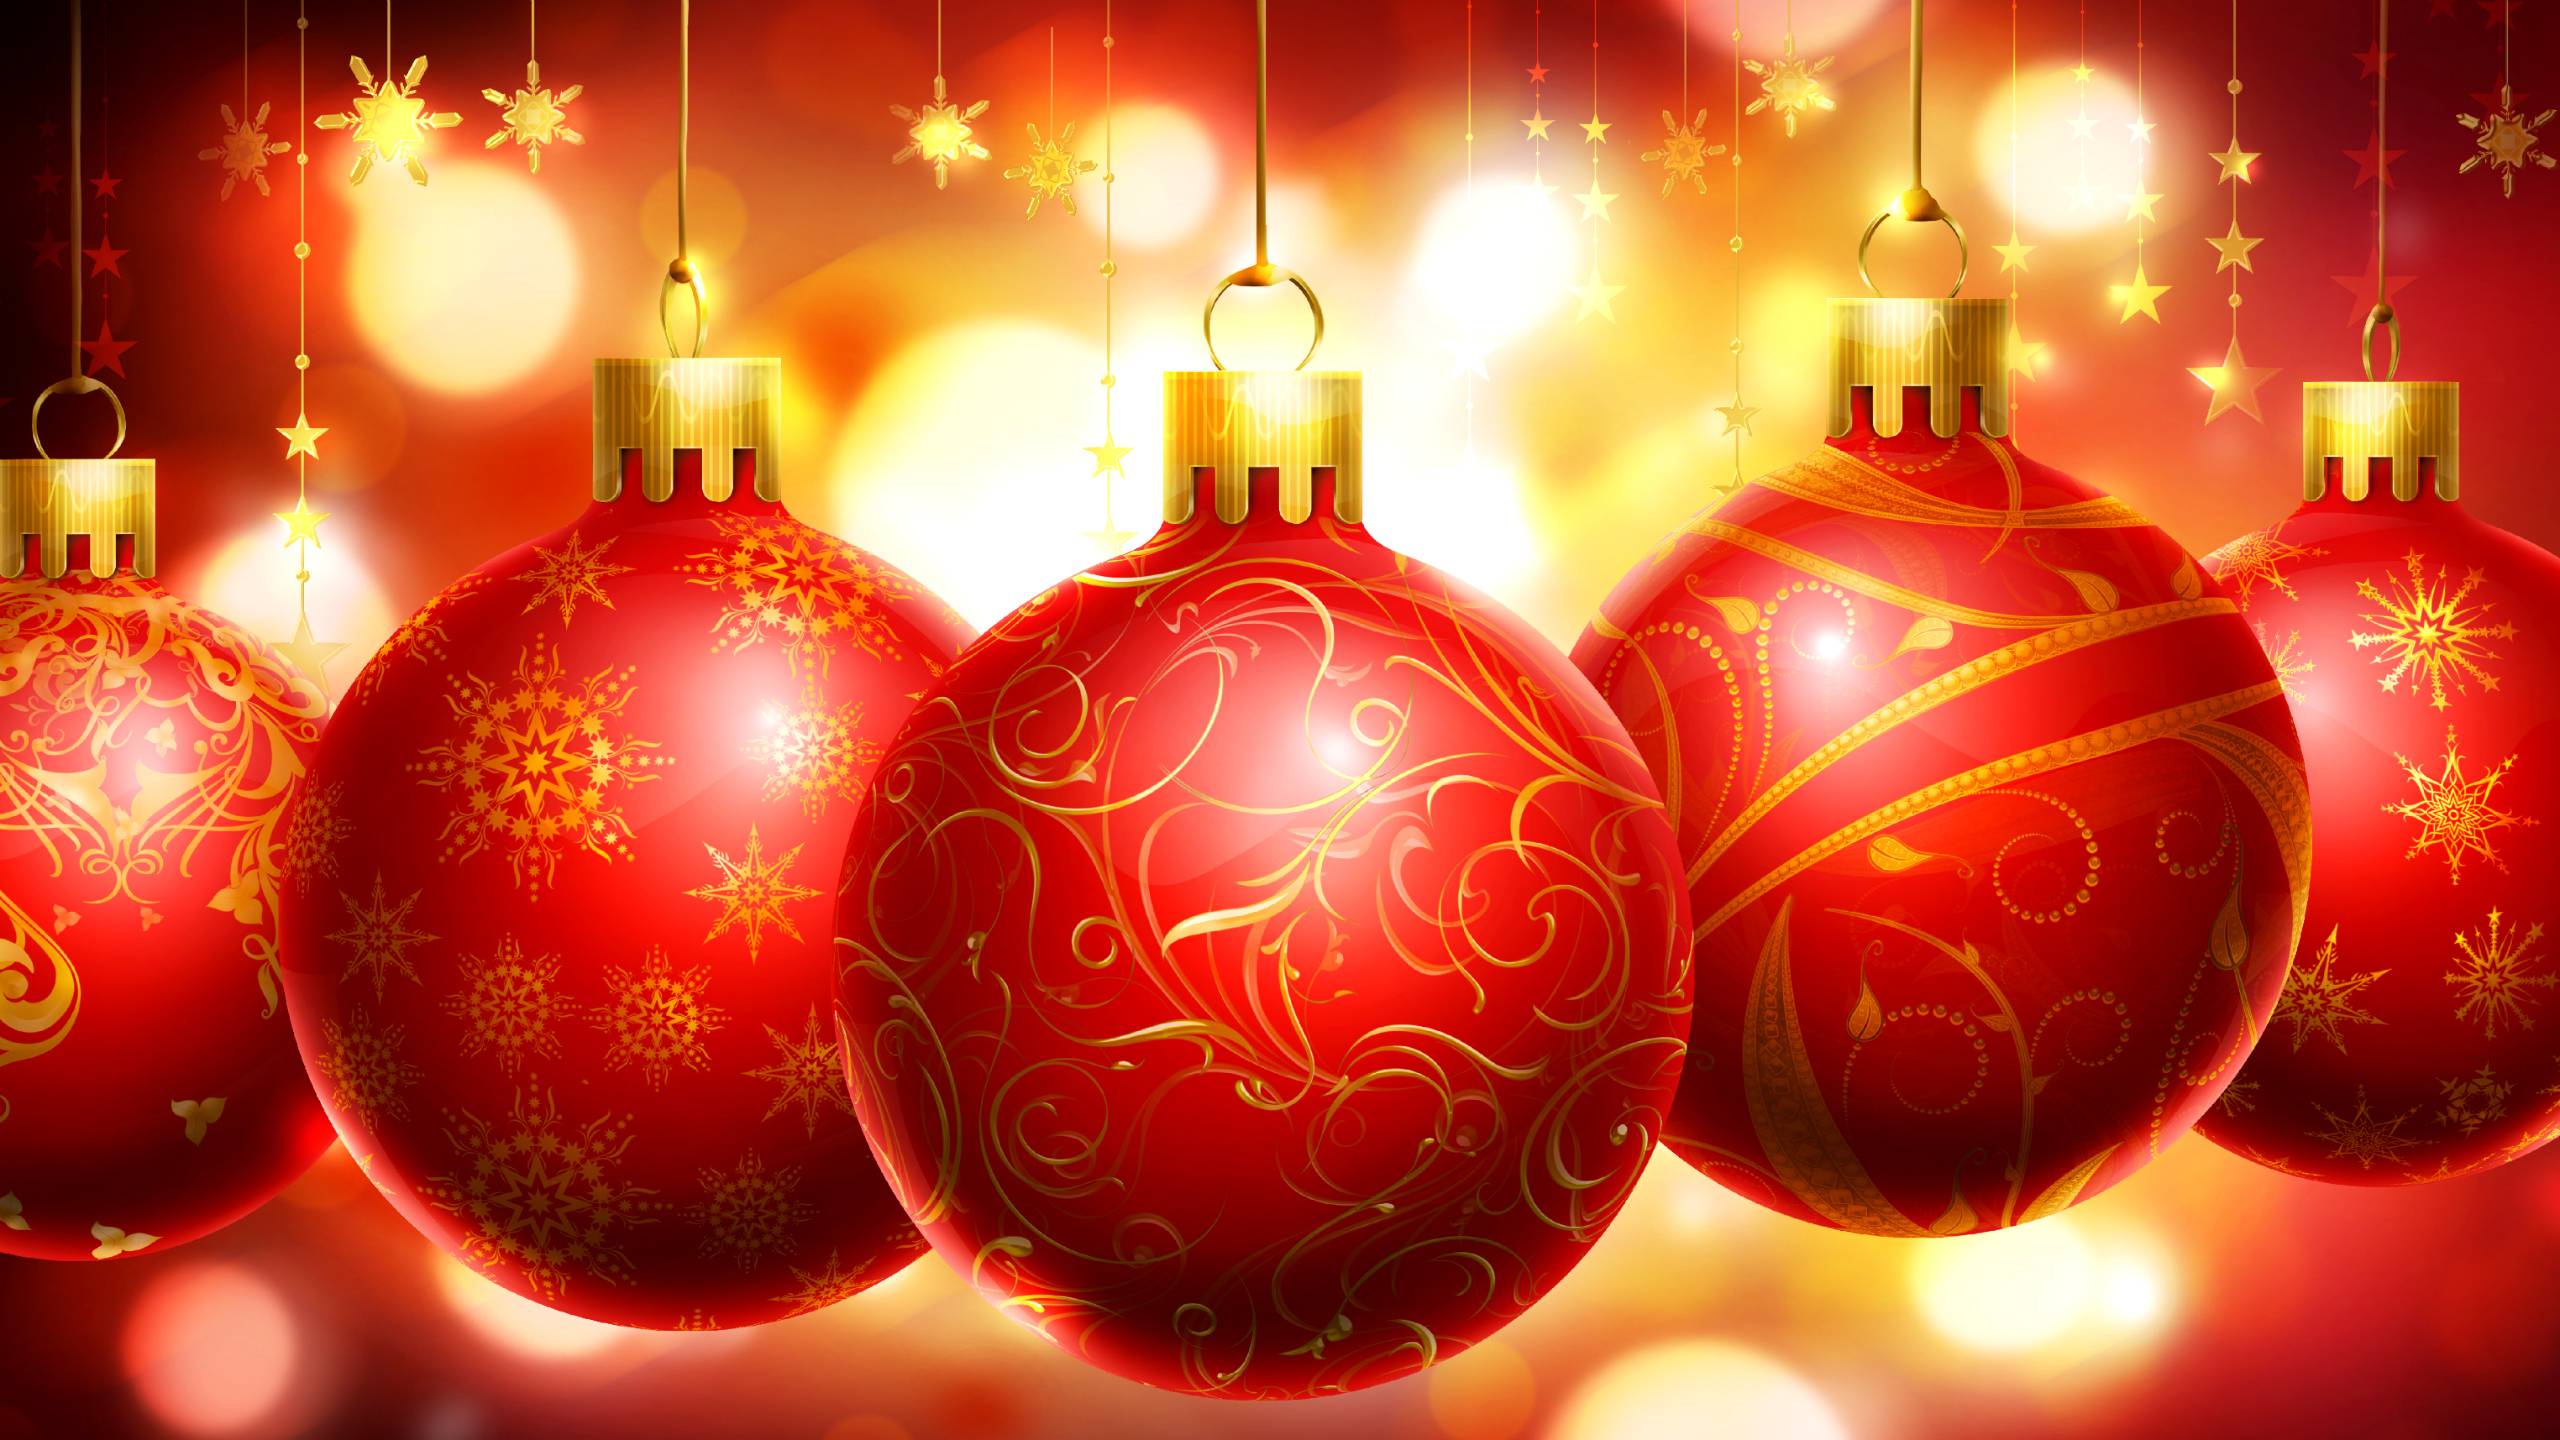 Merry Christmas Background Picture Wallpaper Wallpaper